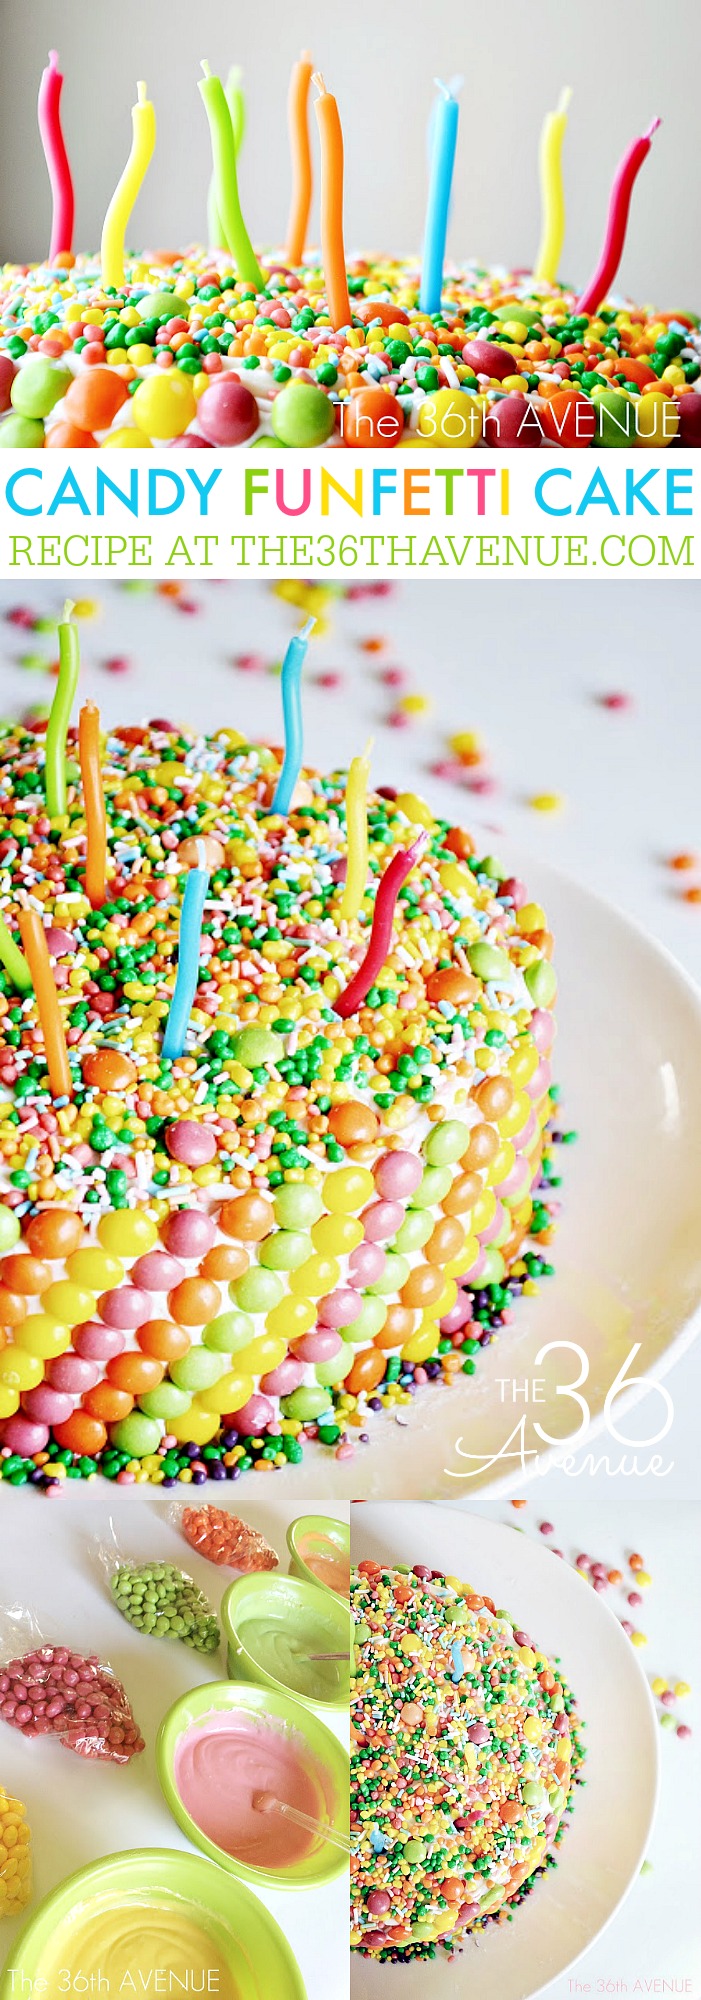 Cake Recipe - This Candy Funfetti Cake Recipe is super fun for birthday parties! Fun to make, fun to eat, and fun to share. Kids love this cake.